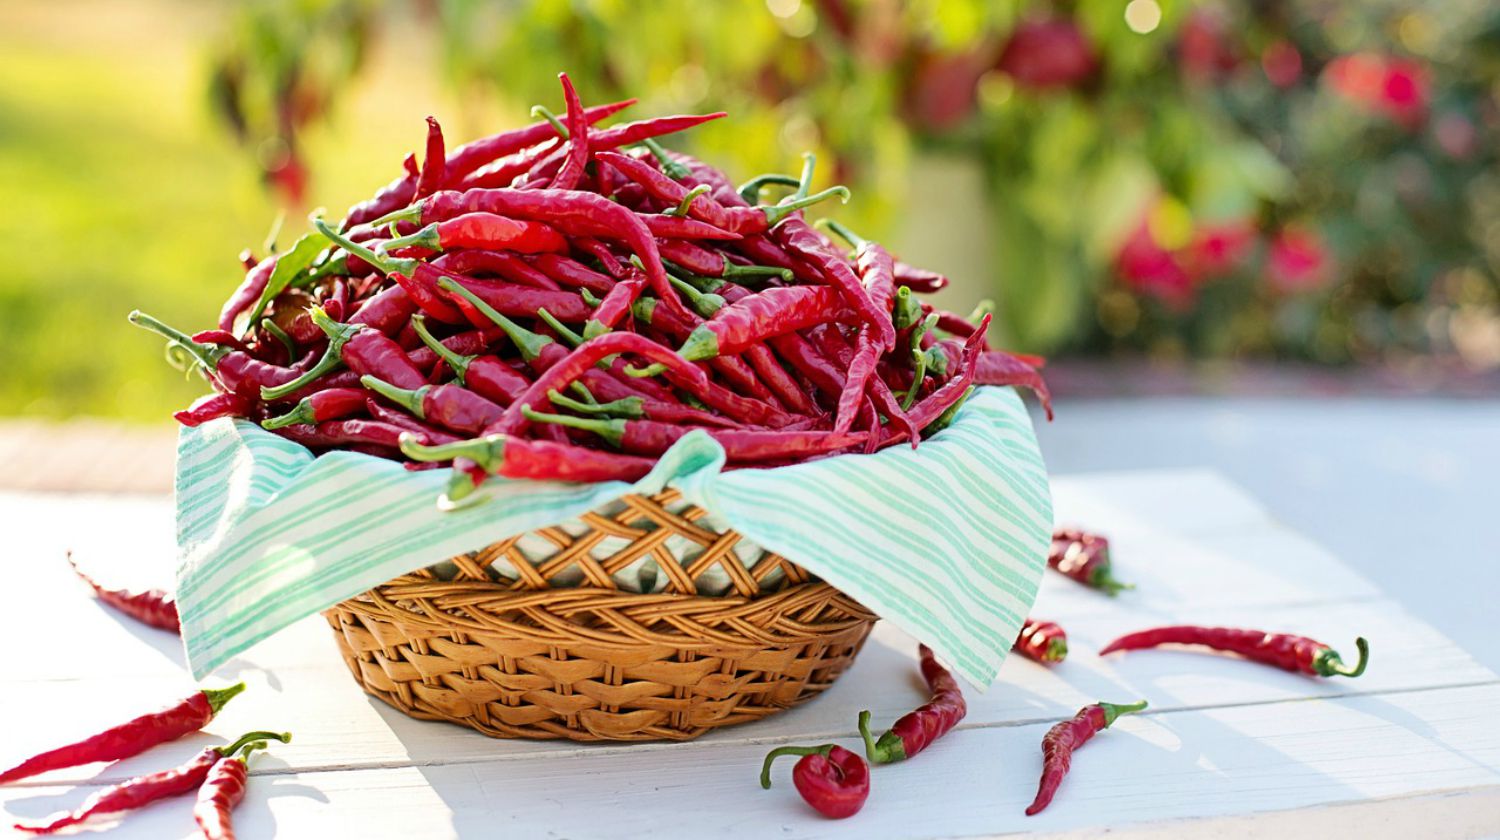 Feature | Basket of Chili Peppers | Top (Delicious) Hot Sauce Recipes You Can Make